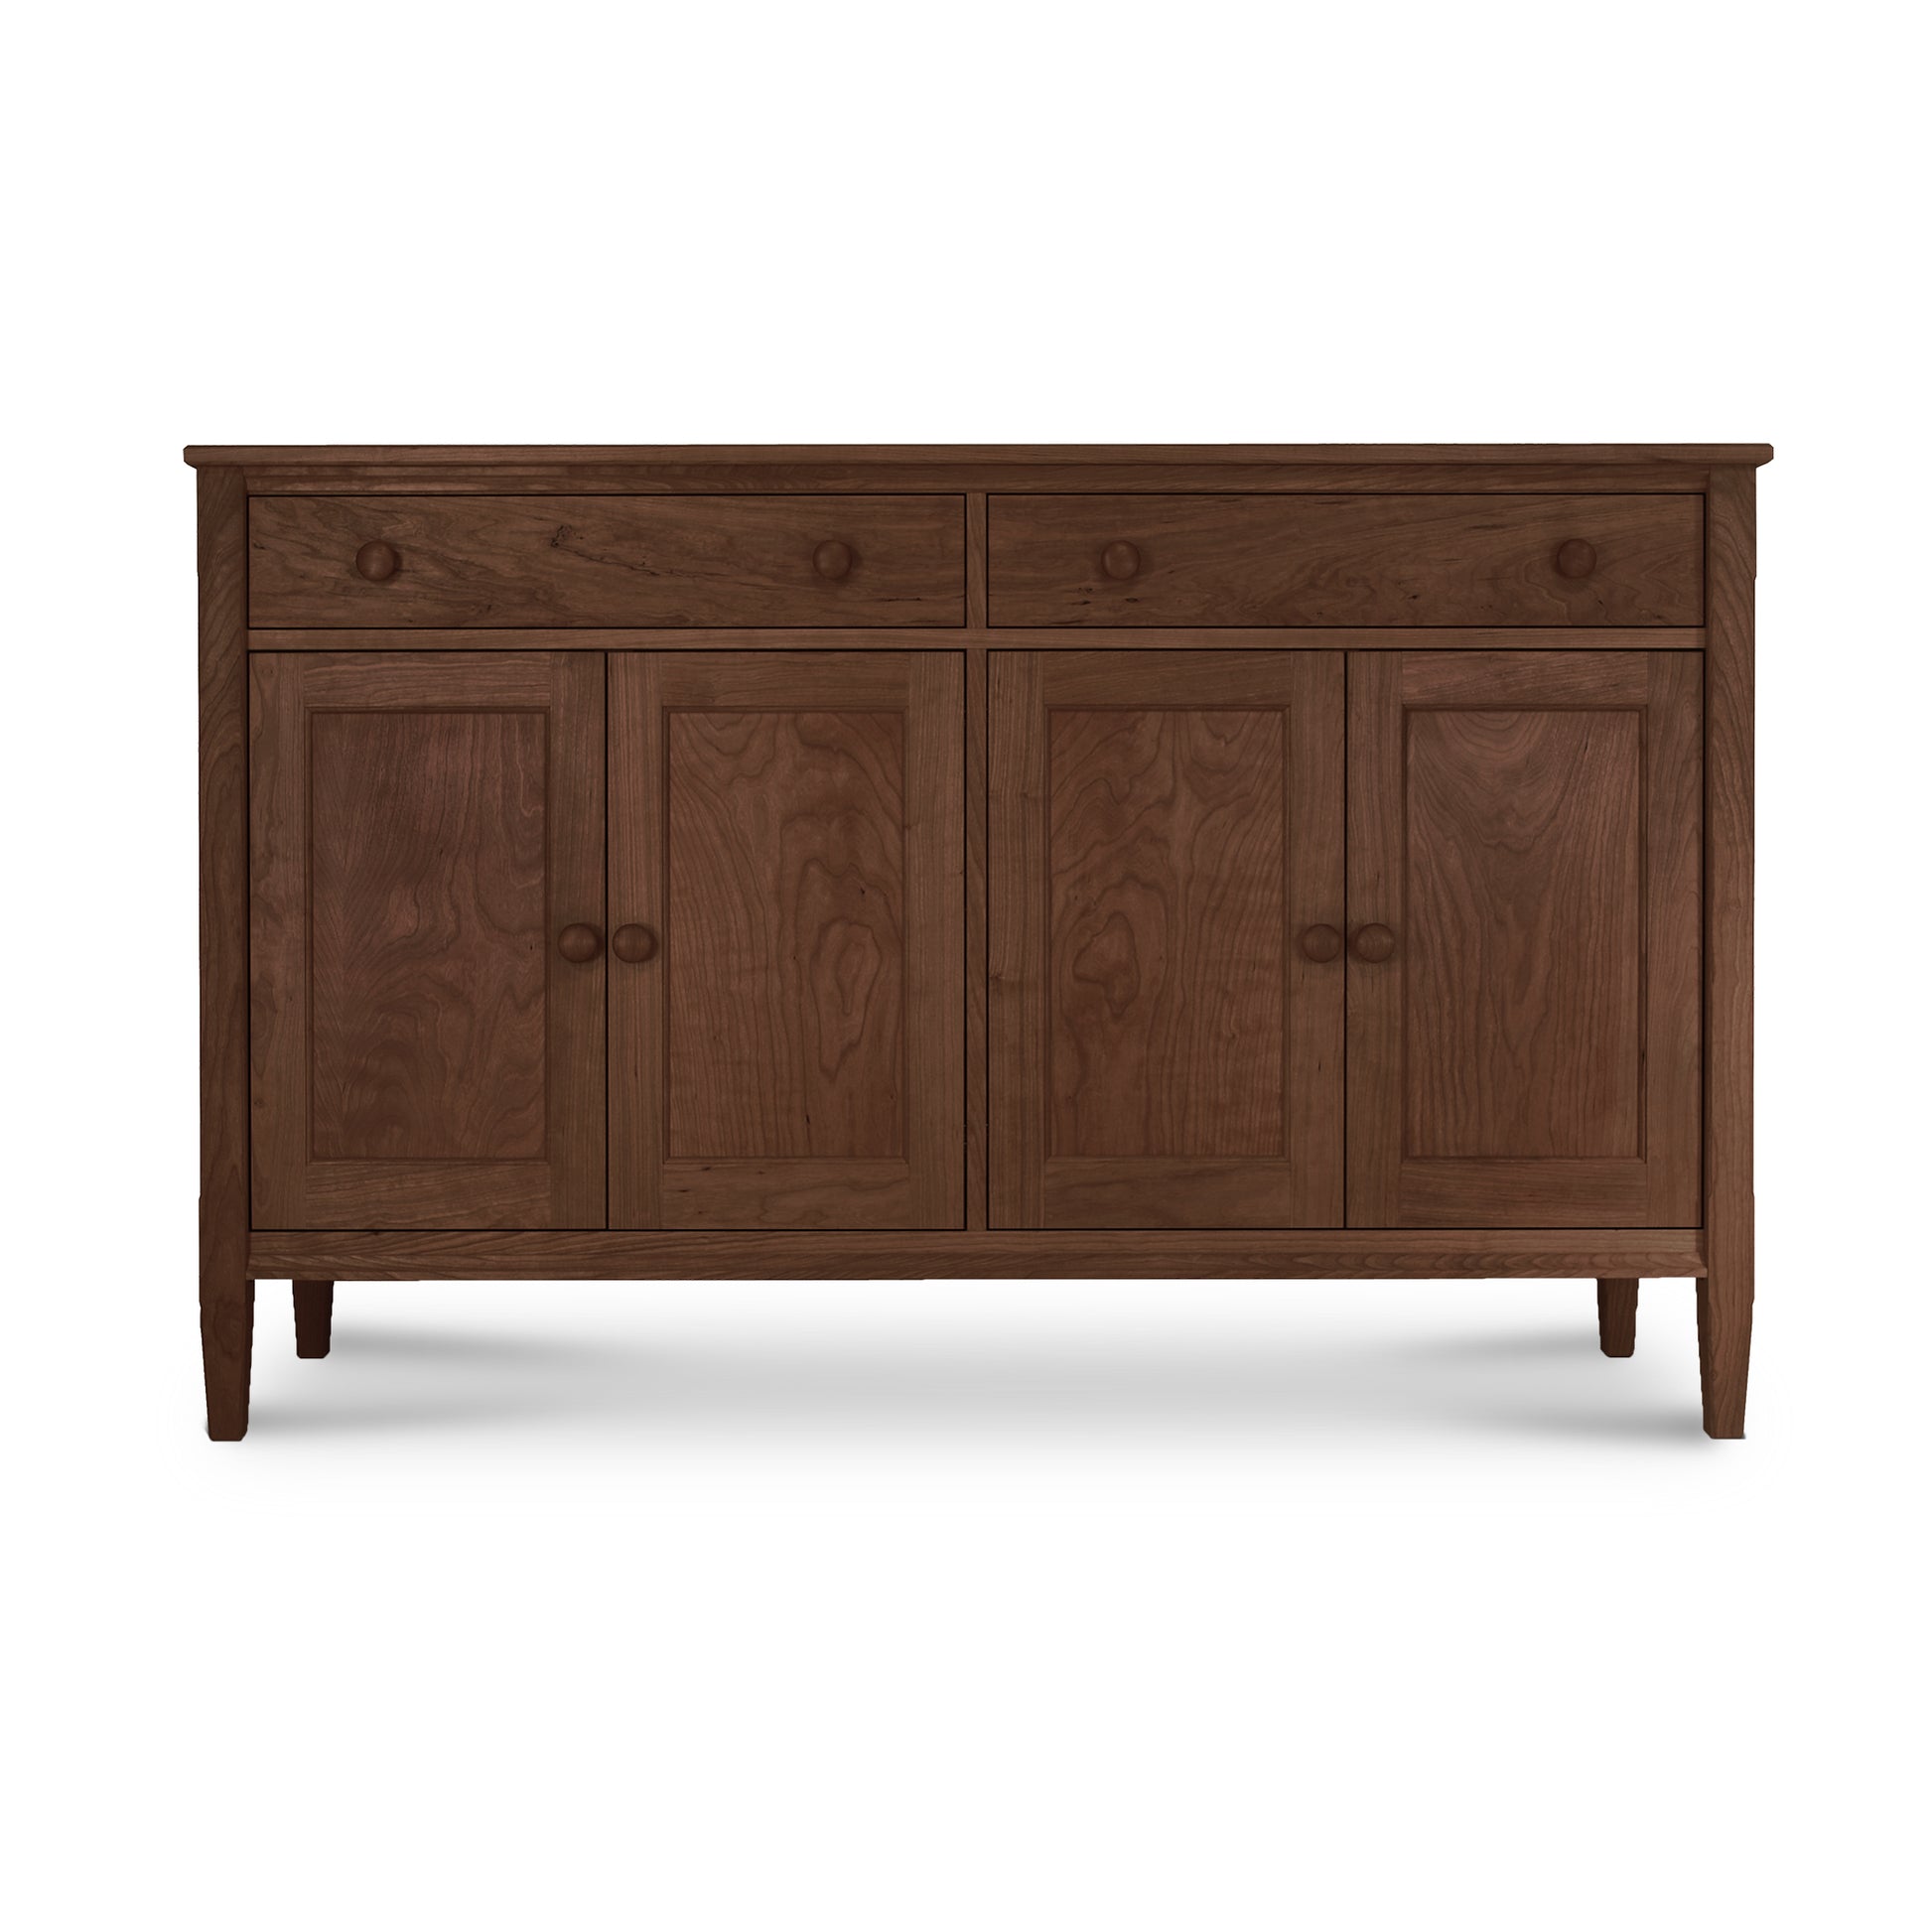 A Vermont Shaker Large 60" Sideboard by Maple Corner Woodworks, with four doors and a single drawer, featuring a natural cherry finish and tapered legs, isolated on a white background.